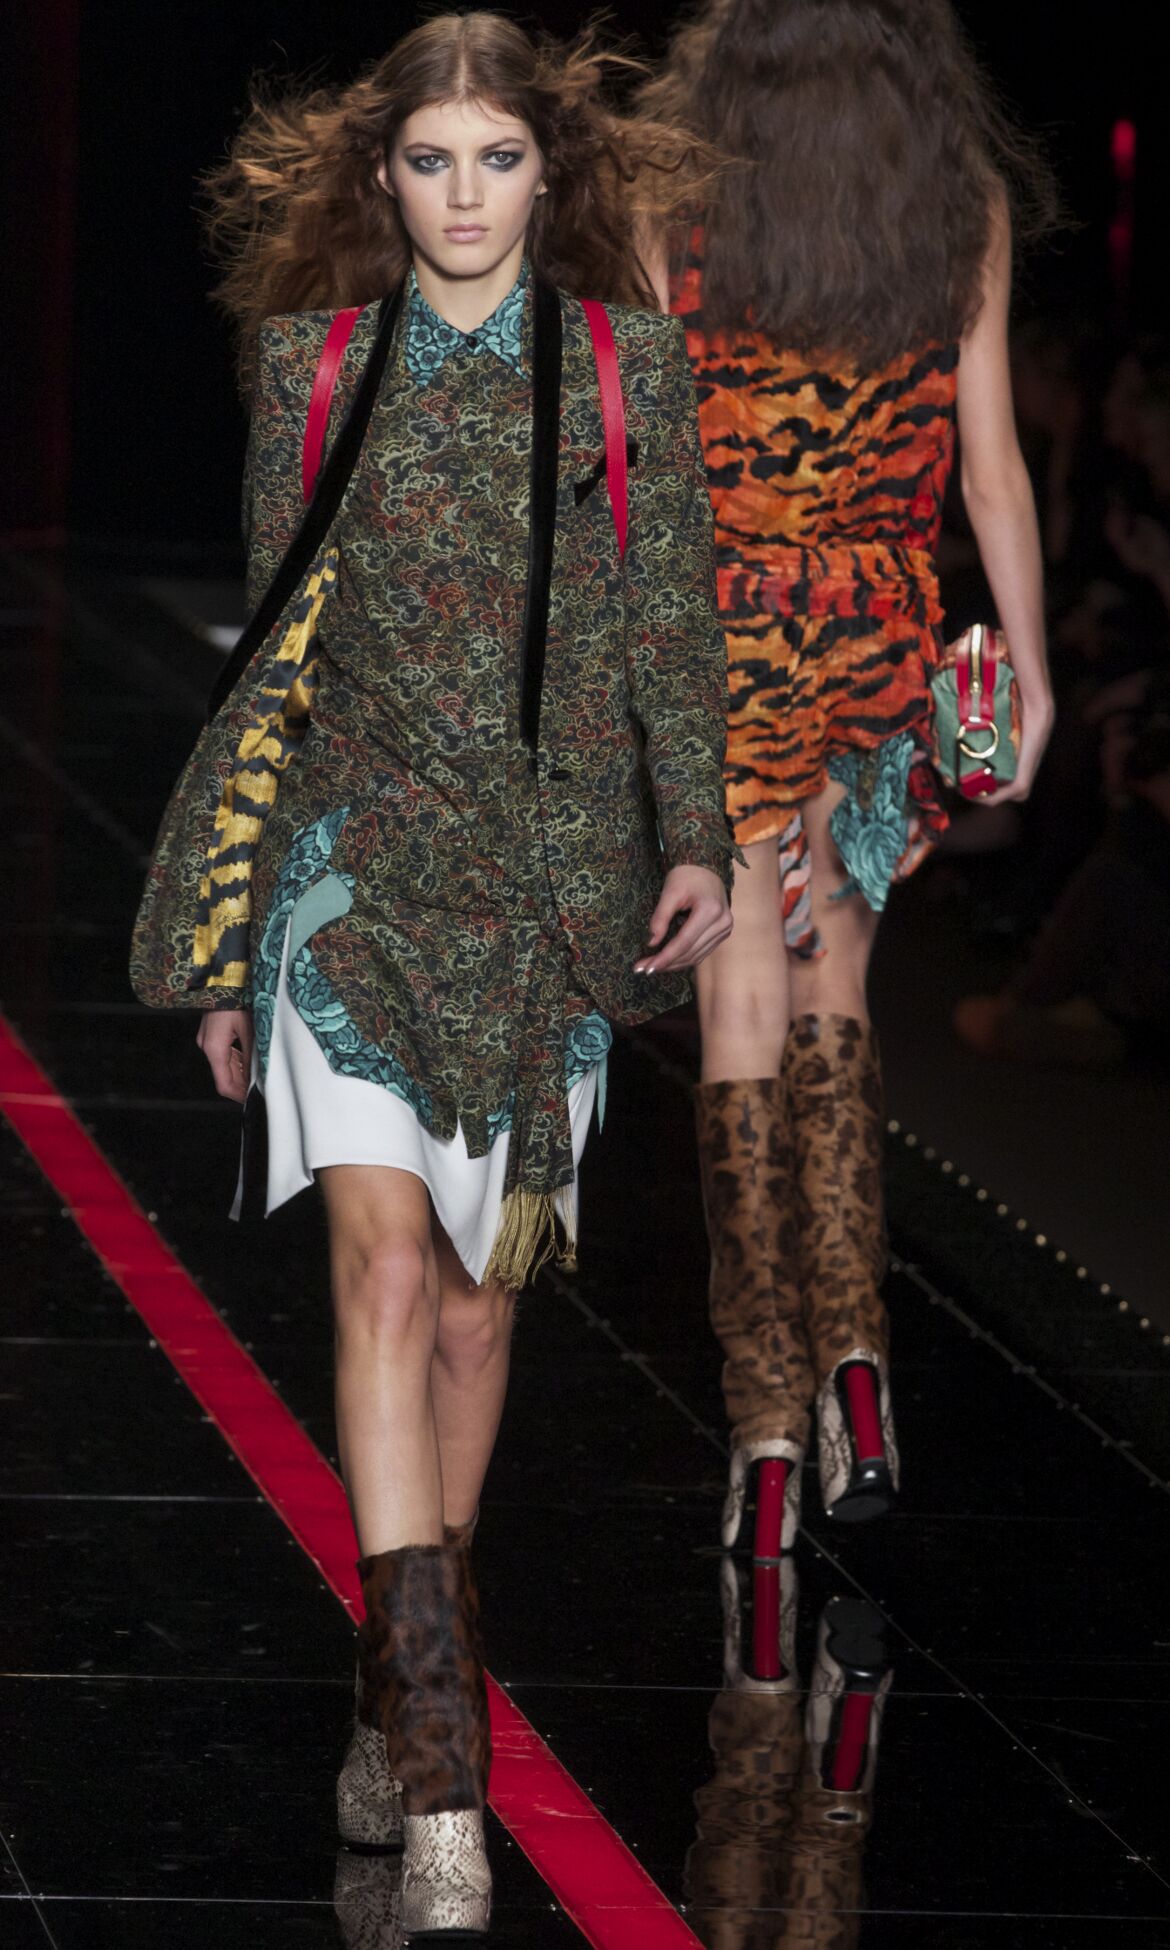 JUST CAVALLI FALL WINTER 2013-14 WOMEN'S COLLECTION | The Skinny Beep